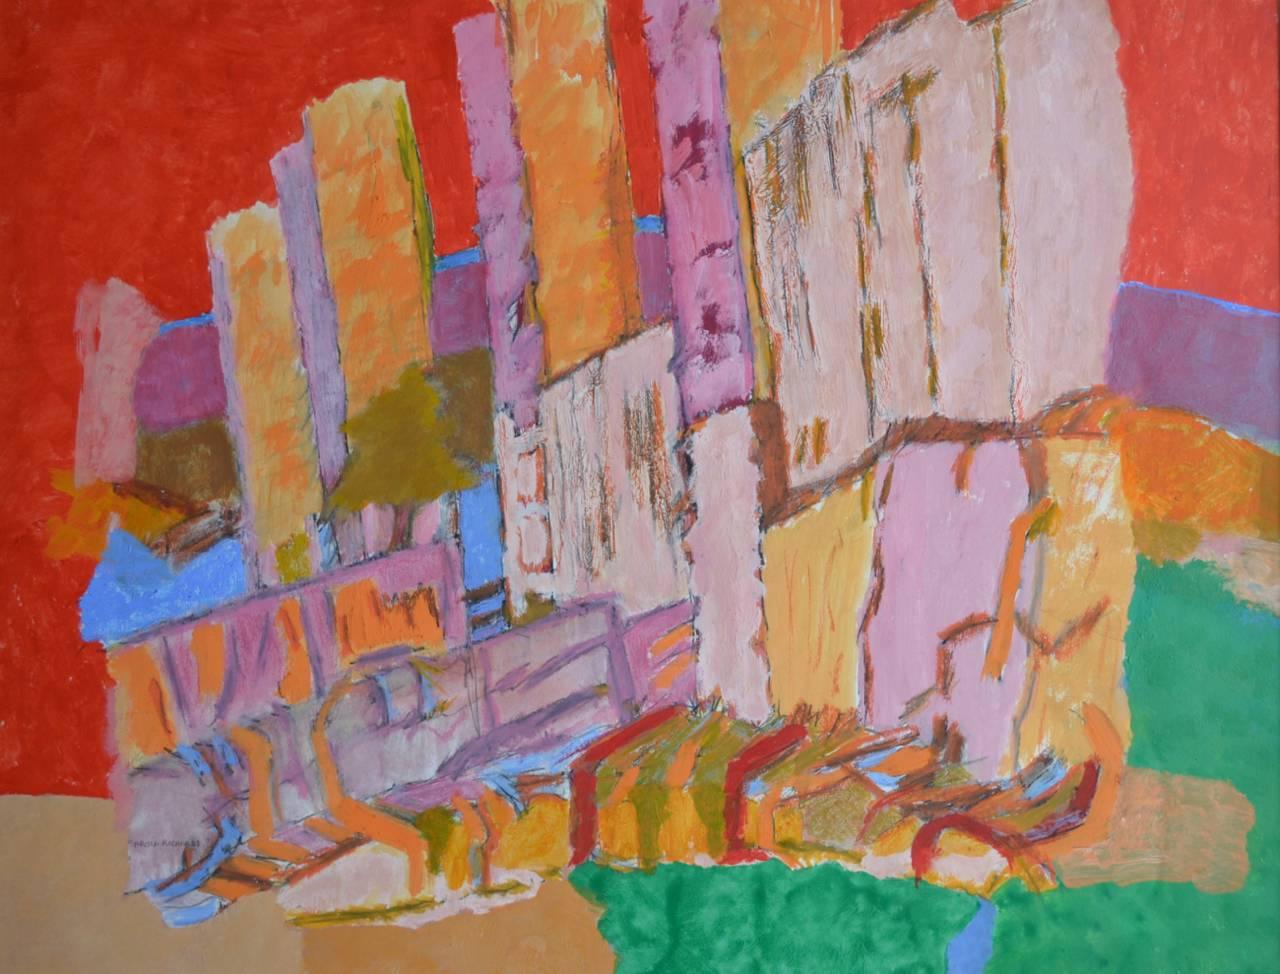 City Skyline. Contemporary Abstract Expressionist Painting - Mixed Media Art by Carola Richards